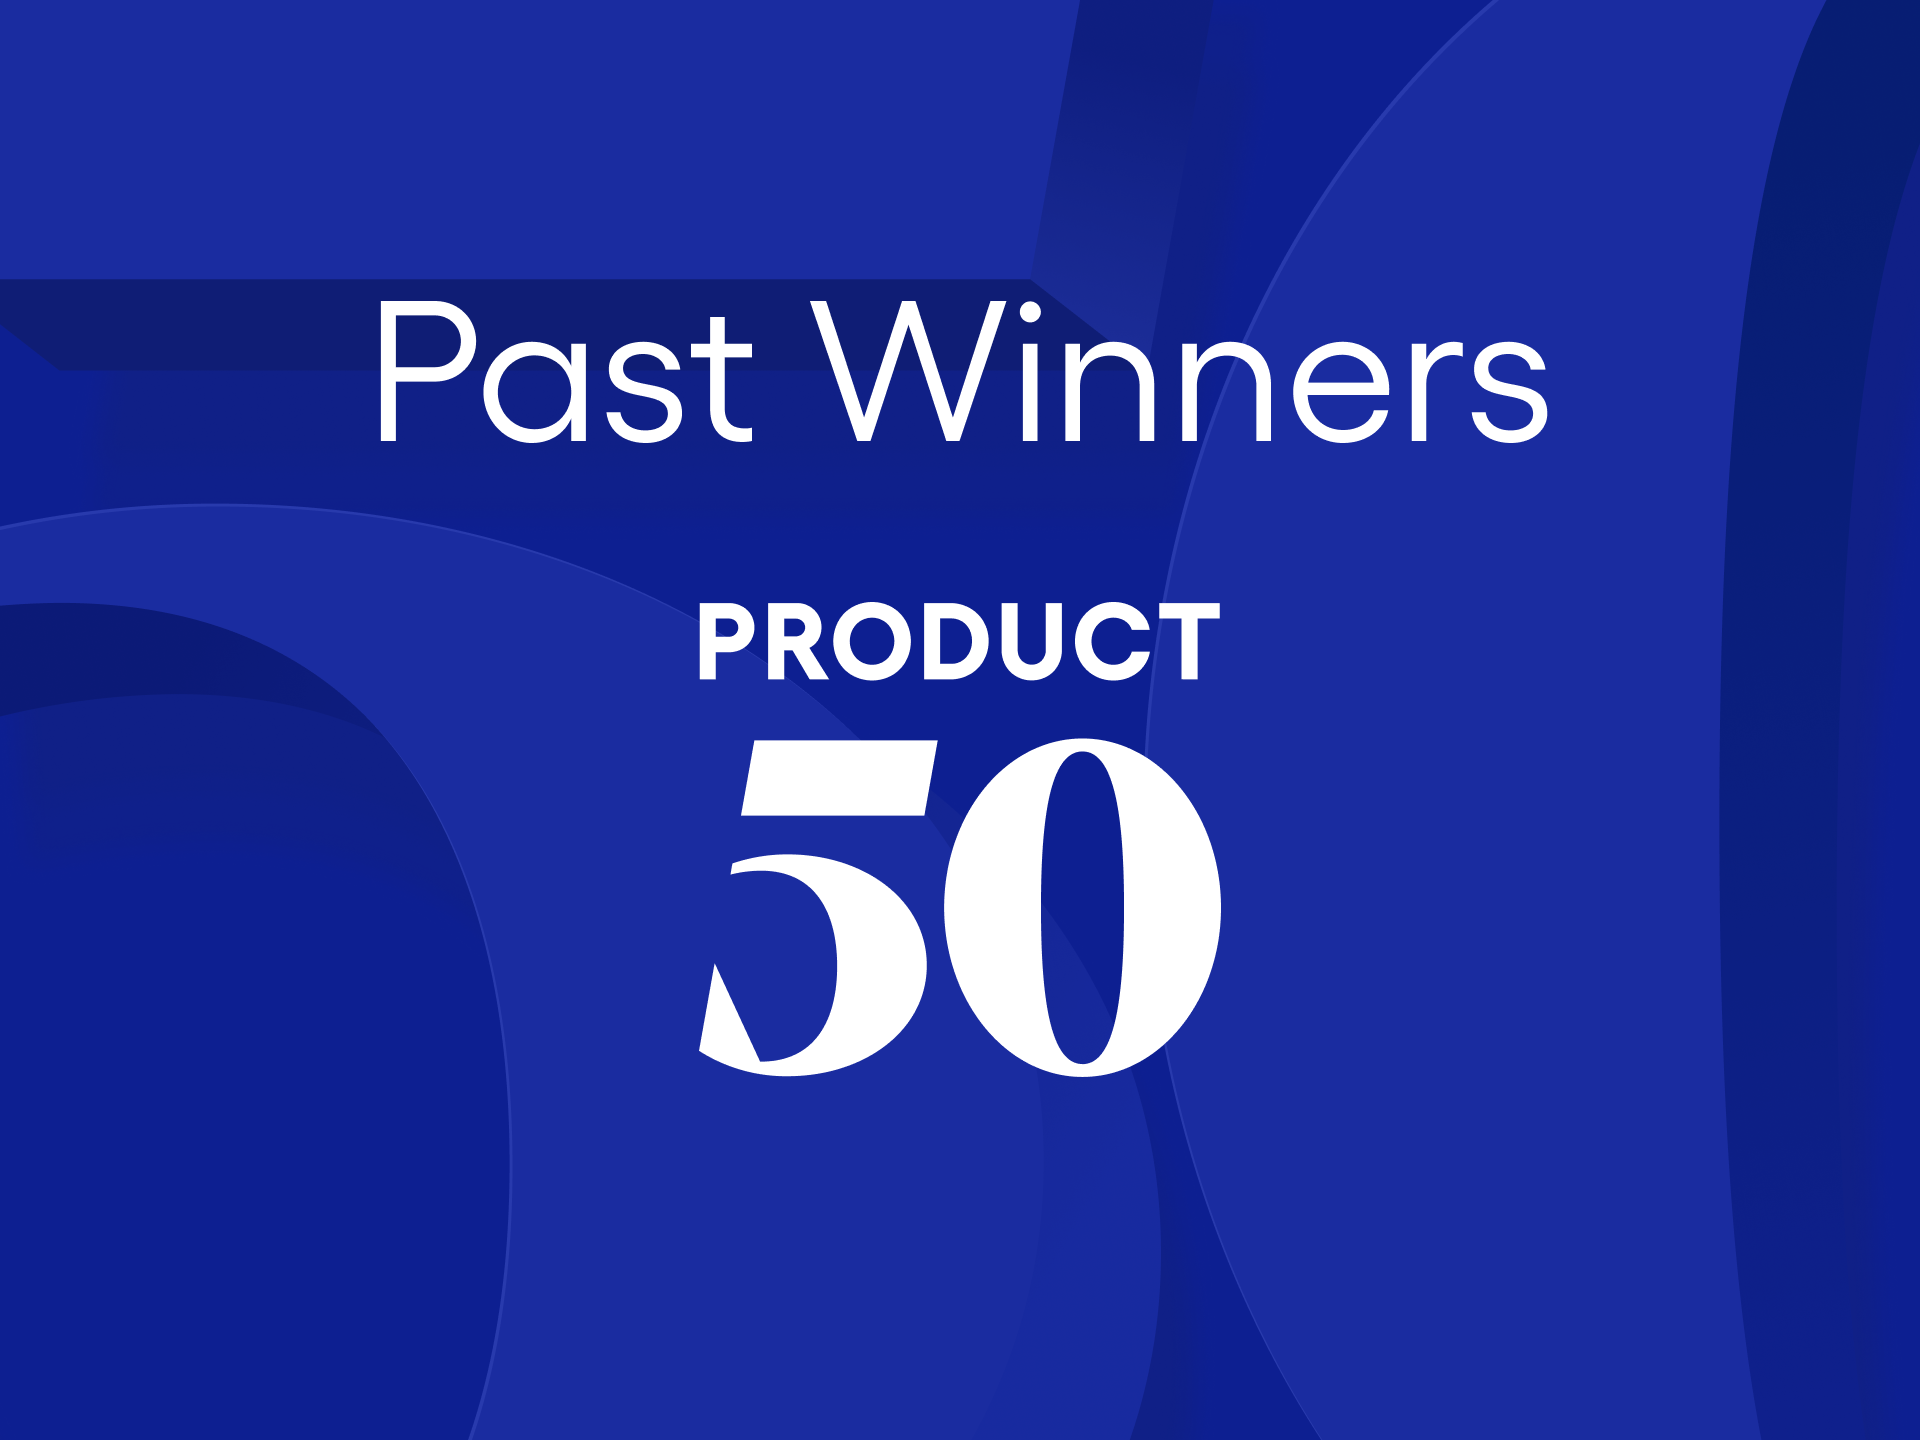 A Product 50 lockup highlighting the inaugural winners of Product 50